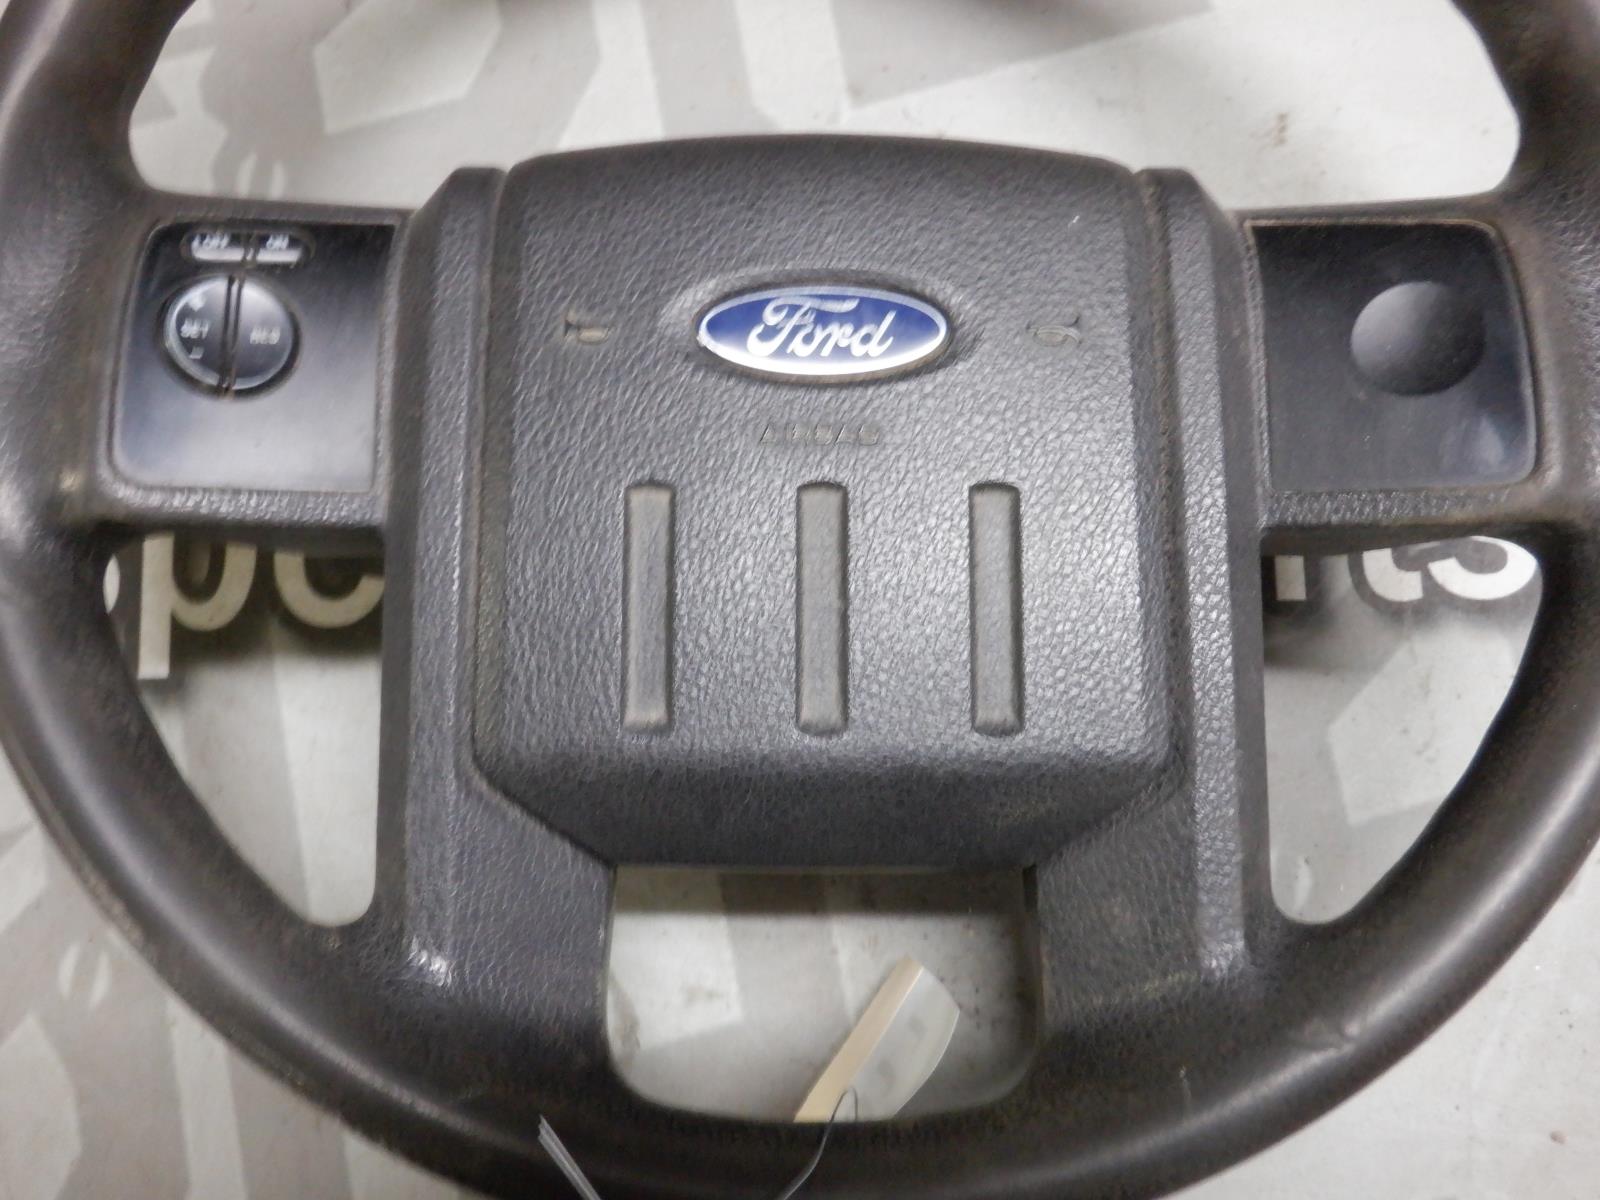 2008 - 2010 FORD F350 F250 XLT OEM STEERING WHEEL (BLACK) CRUISE 2008 F250 Cruise Control Not Working